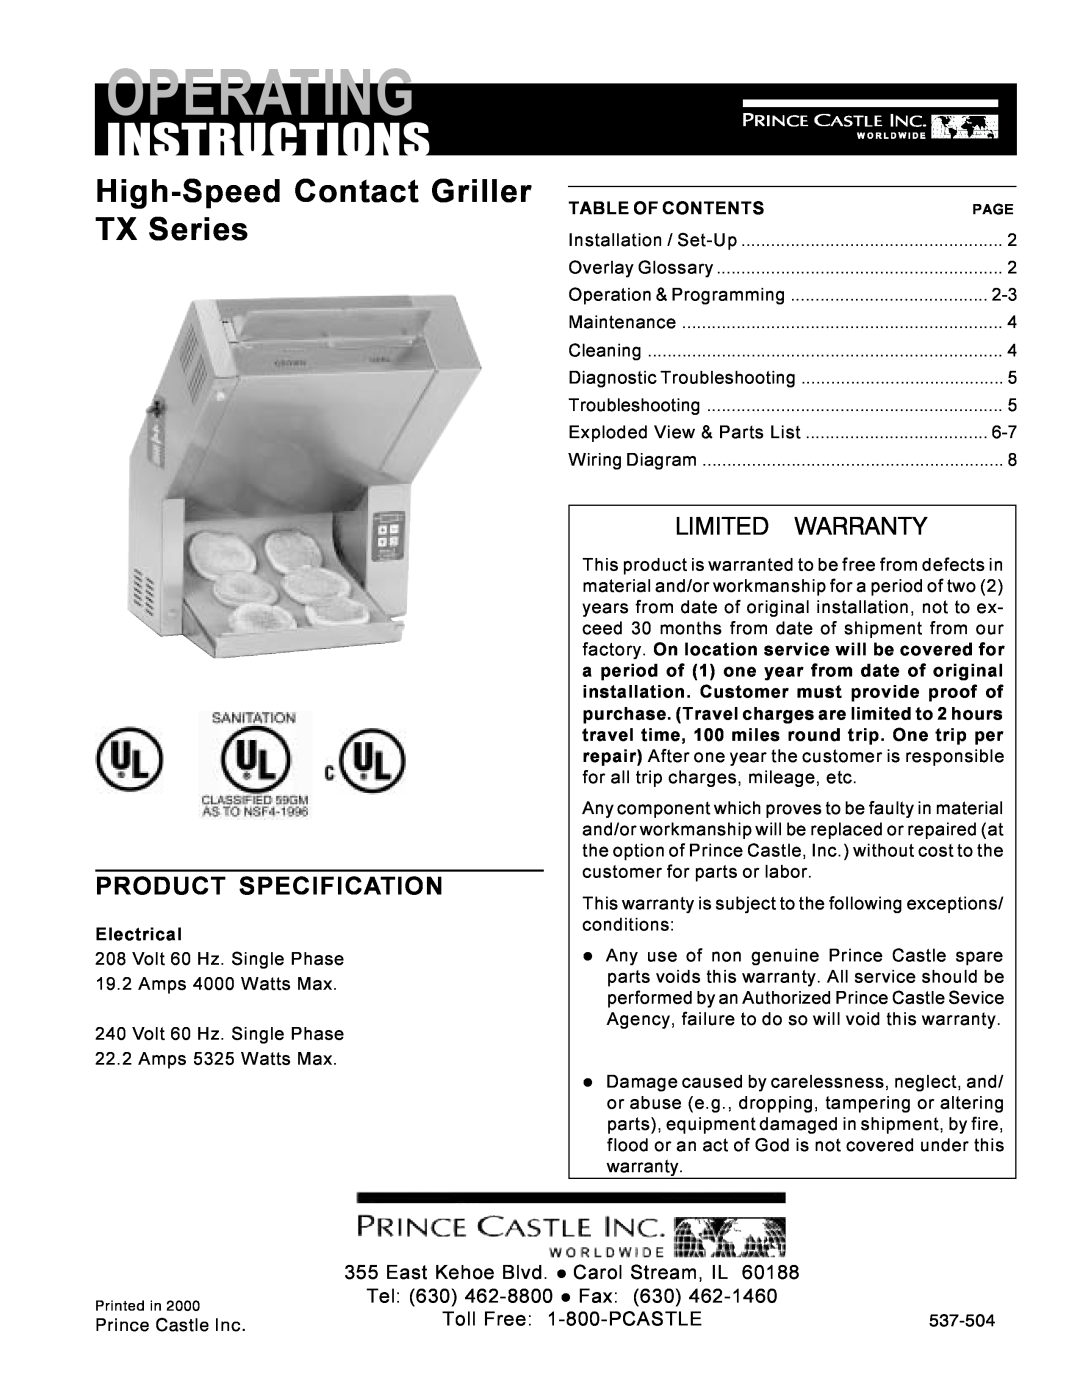 Prince Castle operating instructions High-Speed Contact Griller TX Series, Product Specification, Electrical, Operating 